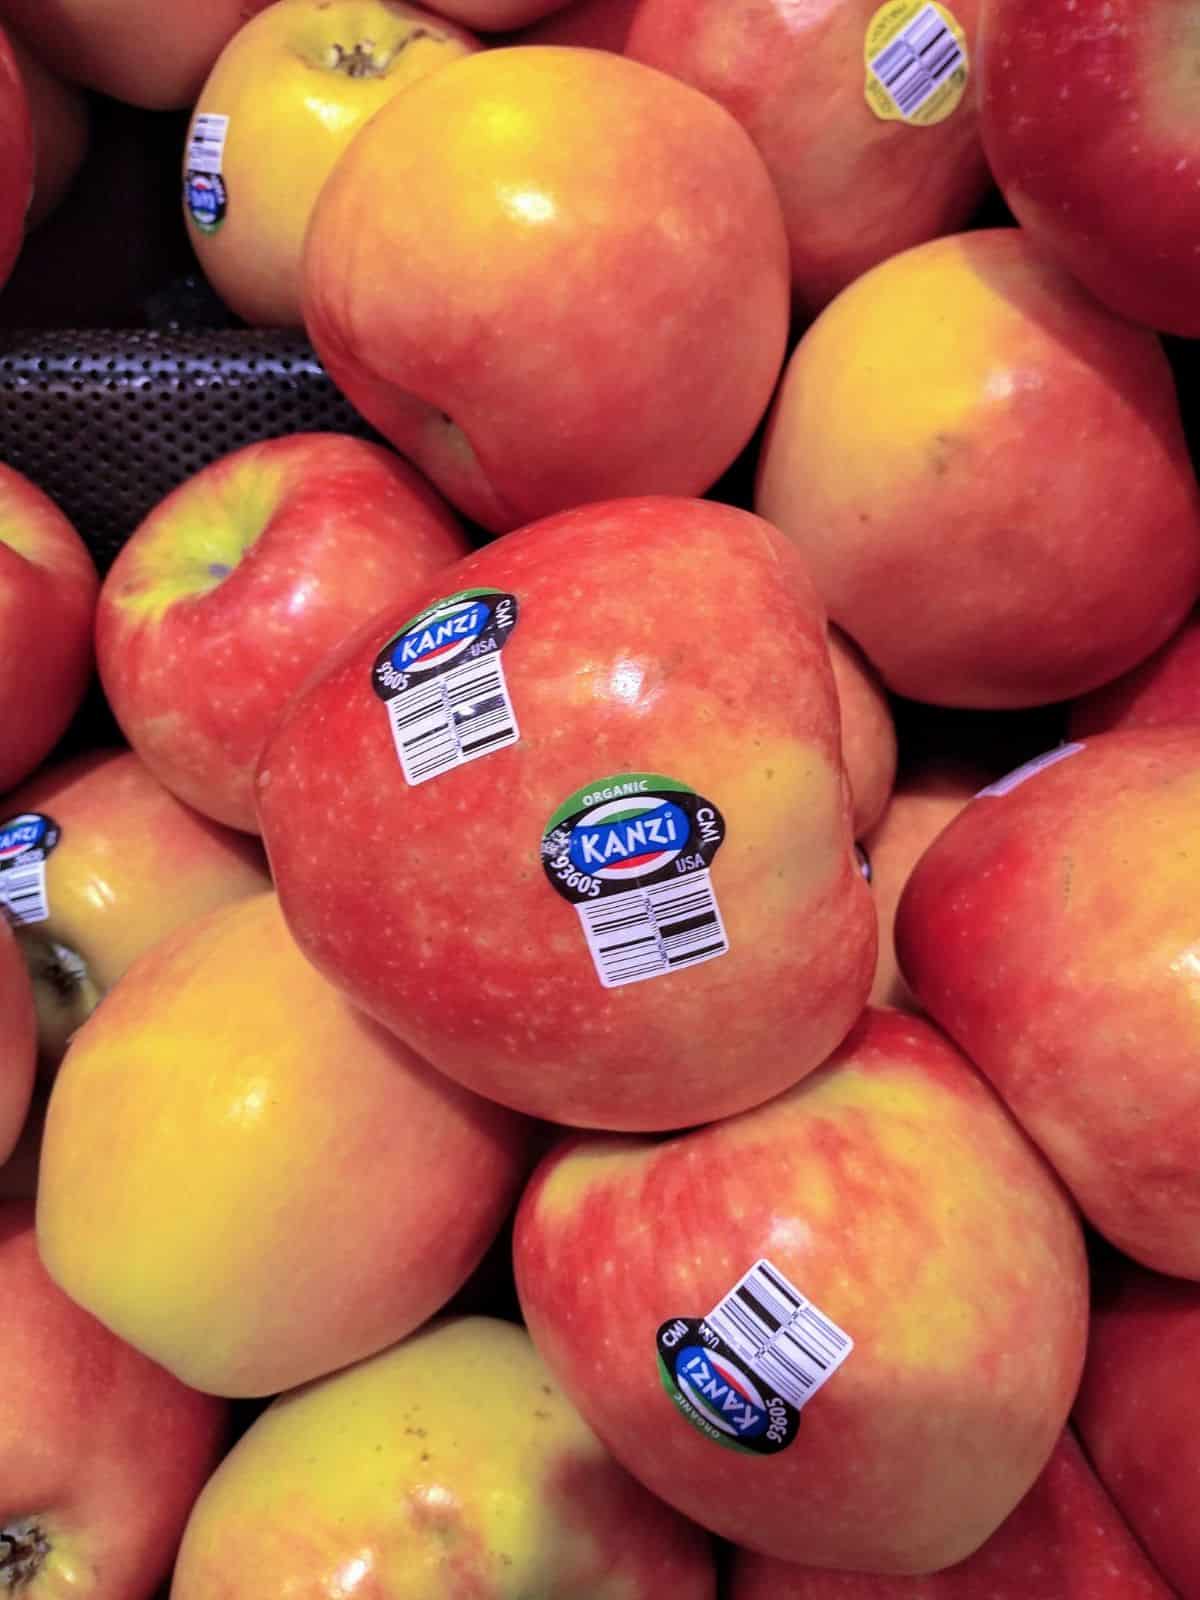 A close up of a display of Kanzi apples with the plu sticker of 93605.